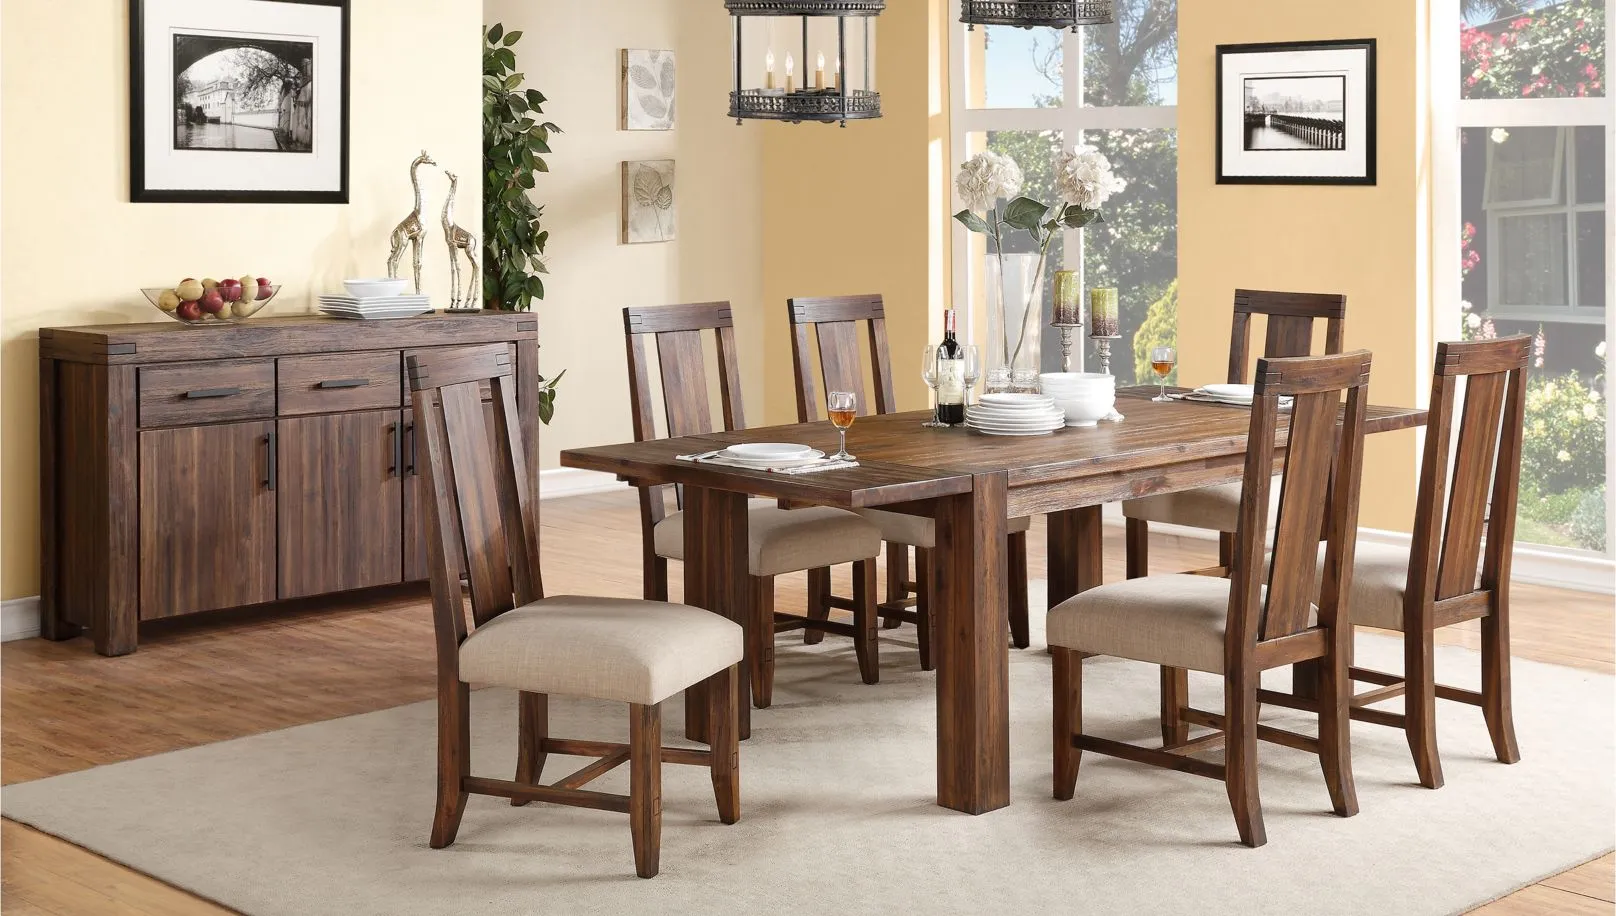 Middlefield 7-pc. Dining Set w/ Upholstered Chairs in Brick Brown by Bellanest